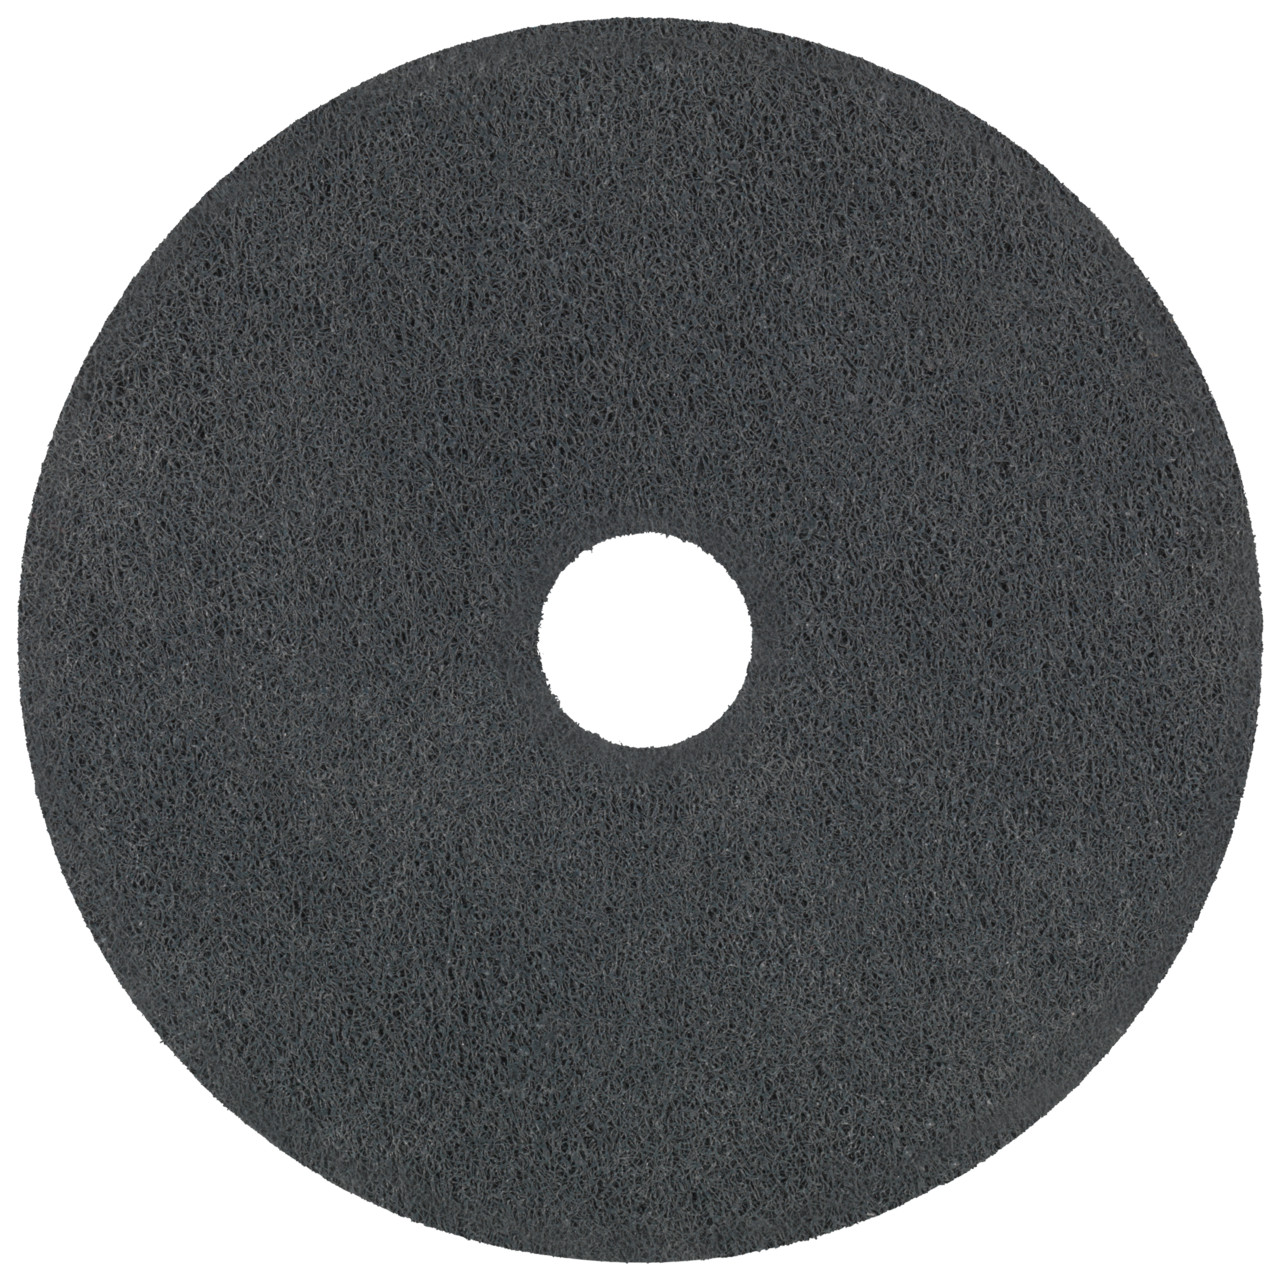 Tyrolit Pressed compact discs DxDxH 152x6x25.4 Universally applicable, 2 C FEIN, shape: 1, Art. 34190275